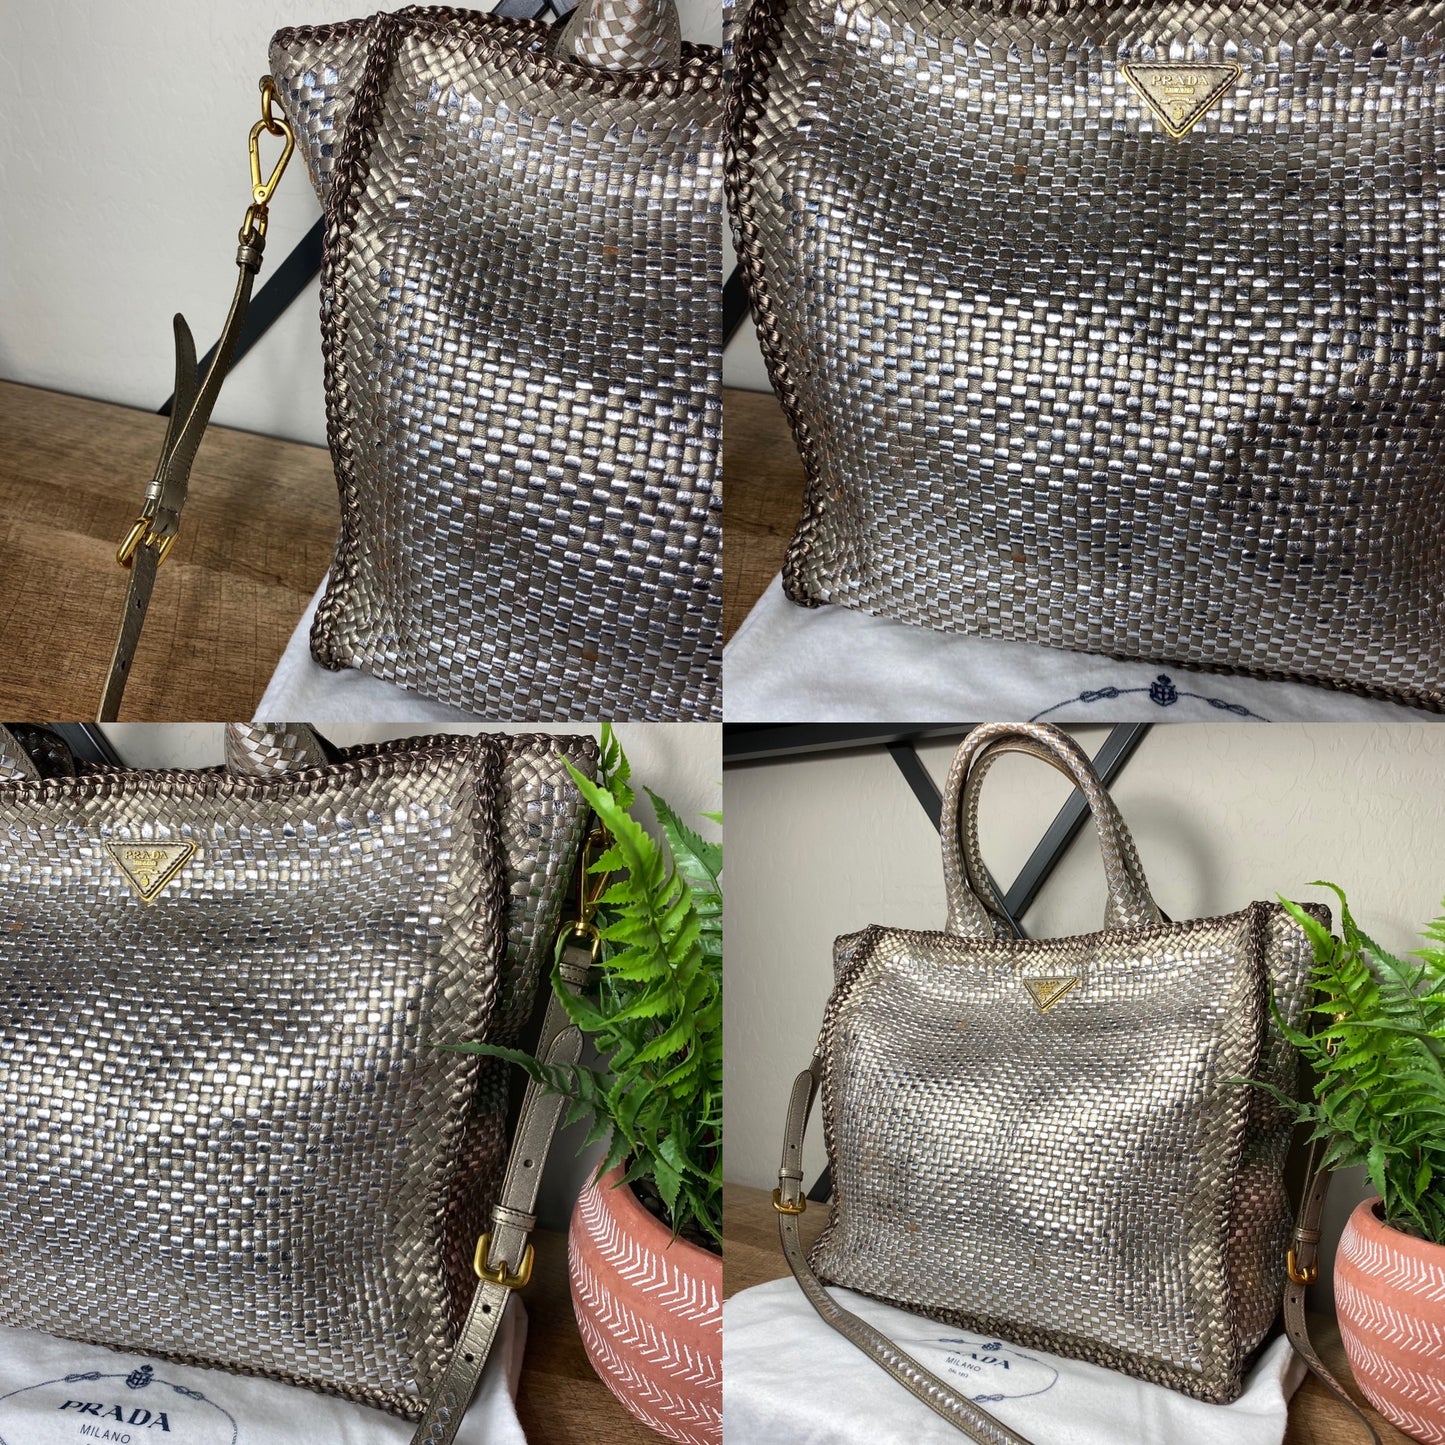 Prada Convertible Madras Woven Leather Large Tote